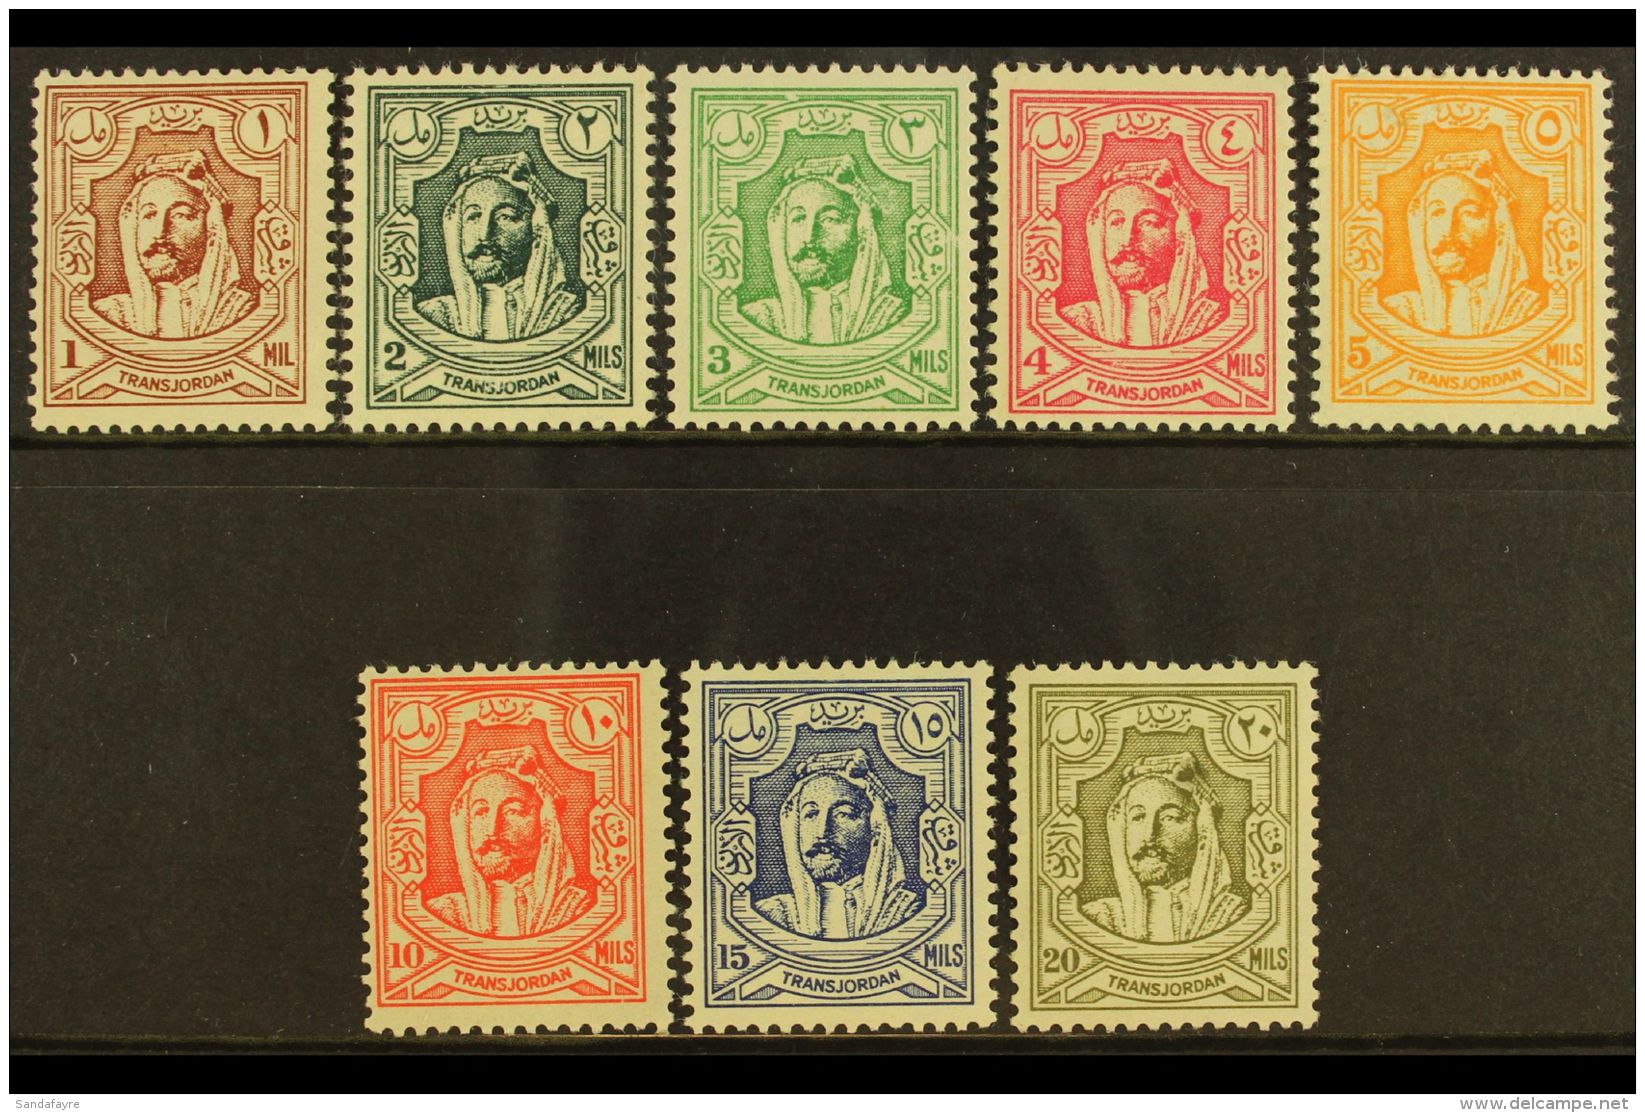 1942 Emir Set, Lithographed, SG 222/9, Very Fine And Fresh Mint. (8 Stamps) For More Images, Please Visit... - Jordanien